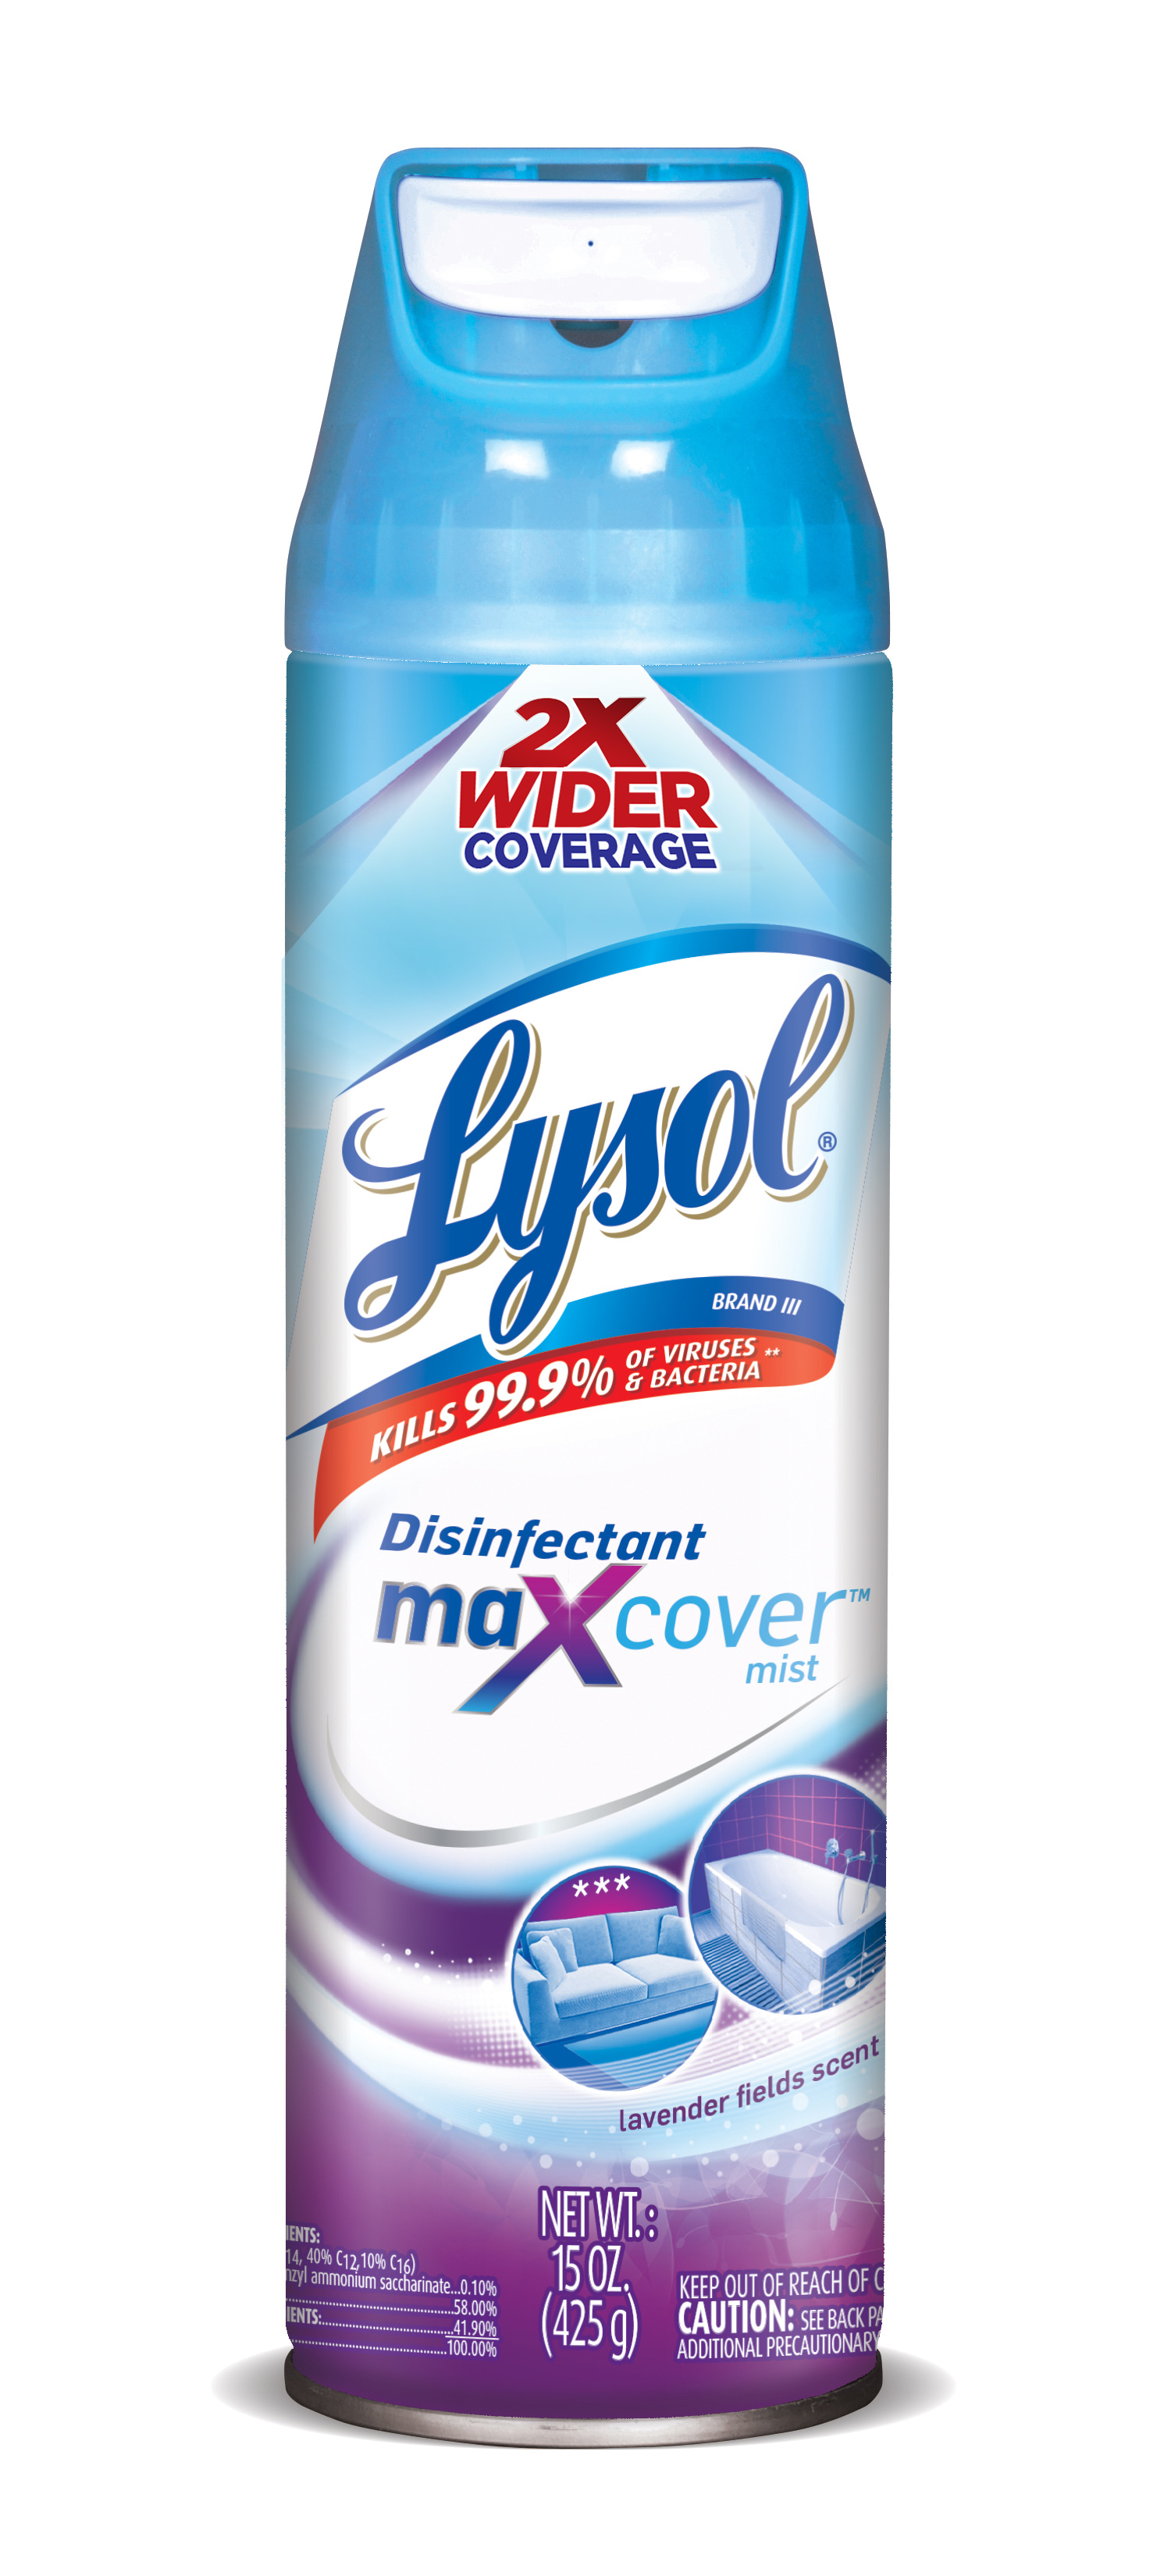 LYSOL® Disinfectant Max Cover Mist - Lavender Fields (Discontinued July 2021)